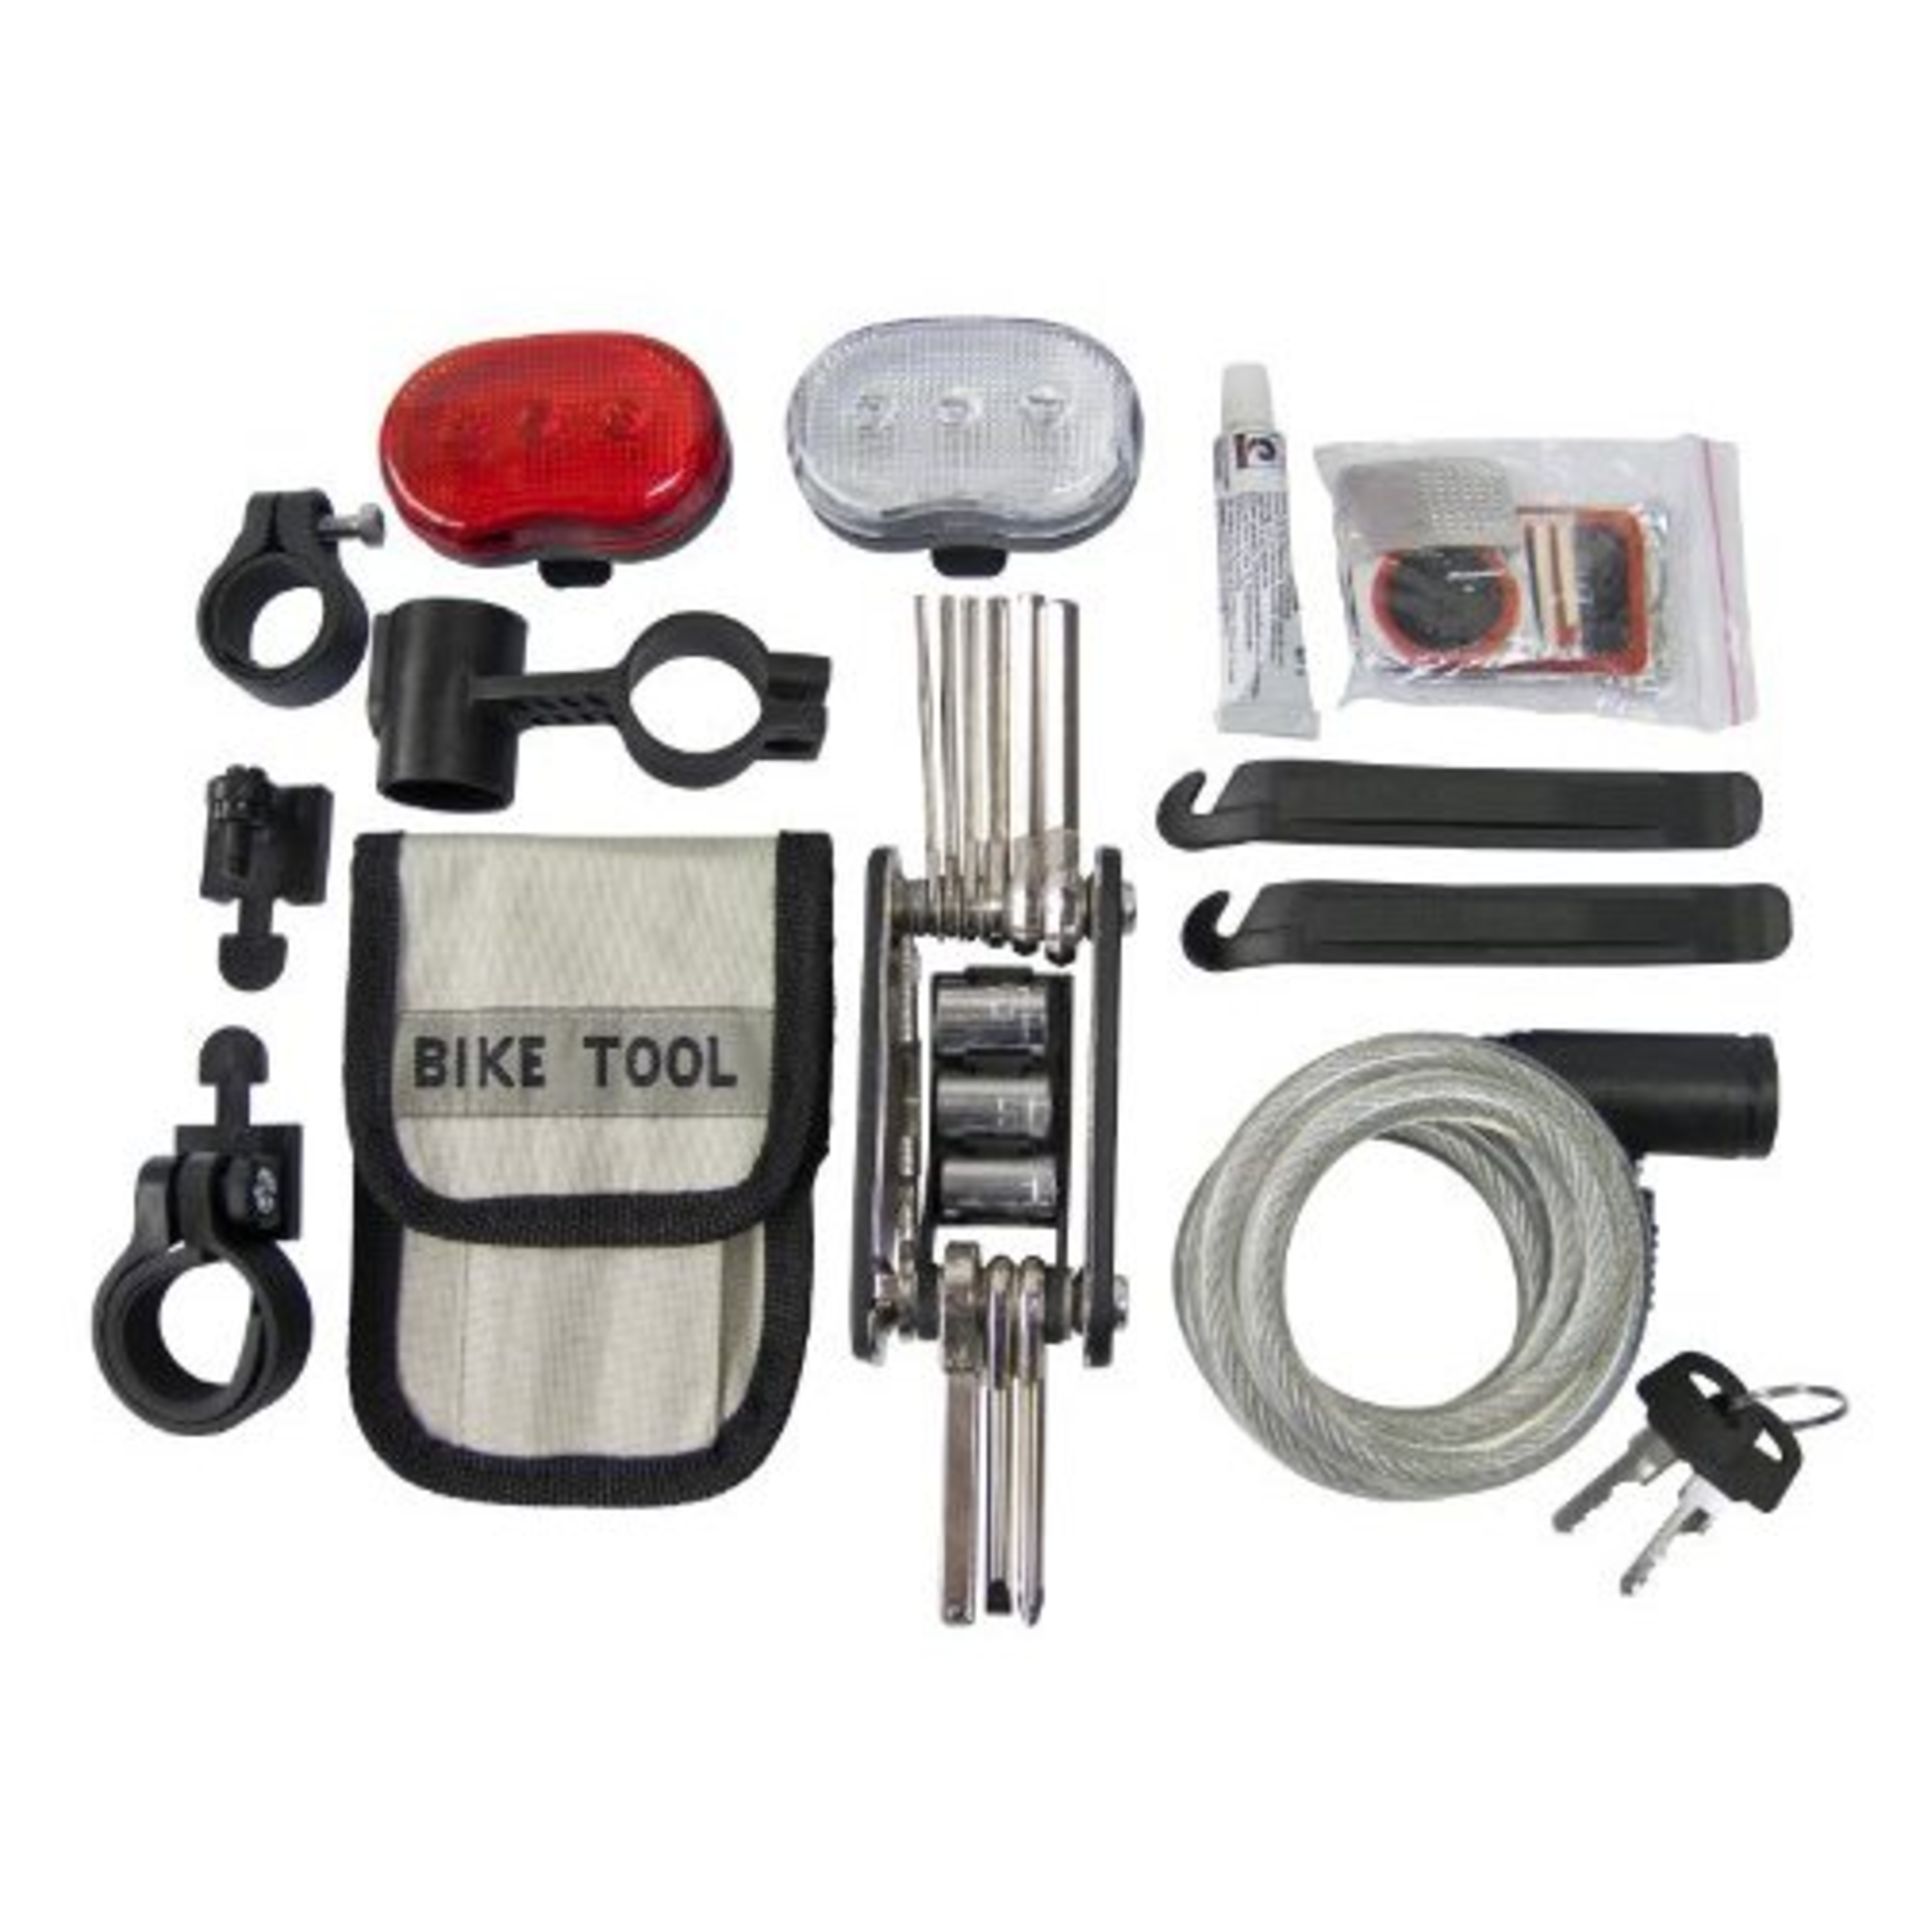 V Bicycle Accessory Set Includes Multi Tool - Sockets - Lock - Puncture Kit - Front & Rear LED